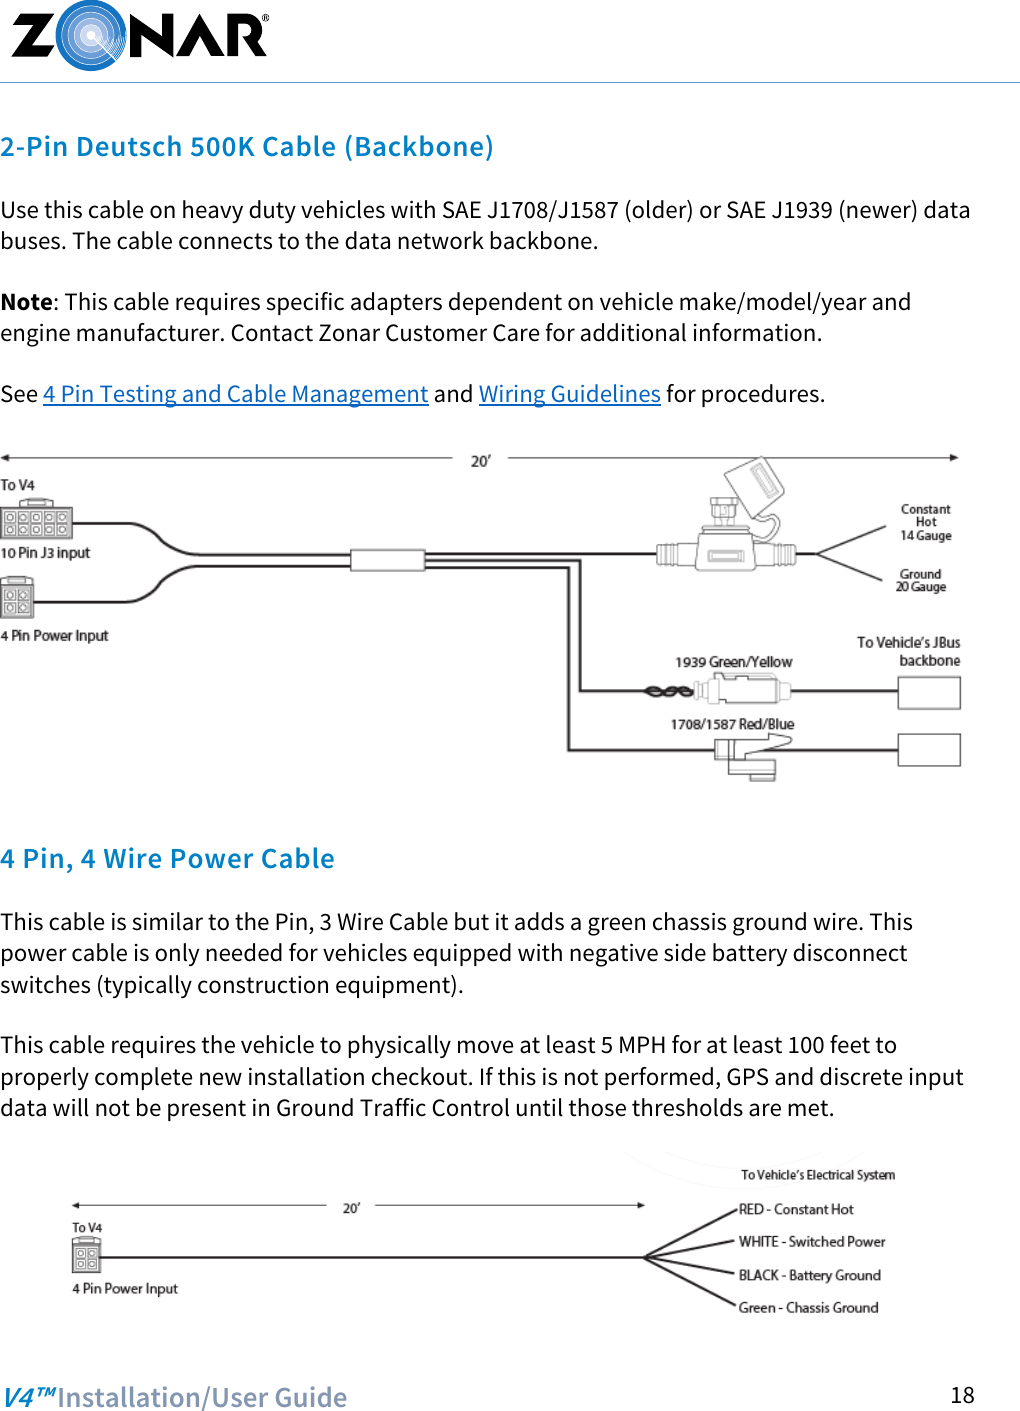   V4™ Installation/User Guide  18 2-Pin Deutsch 500K Cable (Backbone) Use this cable on heavy duty vehicles with SAE J1708/J1587 (older) or SAE J1939 (newer) data buses. The cable connects to the data network backbone.  Note: This cable requires specific adapters dependent on vehicle make/model/year and engine manufacturer. Contact Zonar Customer Care for additional information.  See 4 Pin Testing and Cable Management and Wiring Guidelines for procedures.   4 Pin, 4 Wire Power Cable  This cable is similar to the Pin, 3 Wire Cable but it adds a green chassis ground wire. This power cable is only needed for vehicles equipped with negative side battery disconnect switches (typically construction equipment).  This cable requires the vehicle to physically move at least 5 MPH for at least 100 feet to properly complete new installation checkout. If this is not performed, GPS and discrete input data will not be present in Ground Traffic Control until those thresholds are met.  